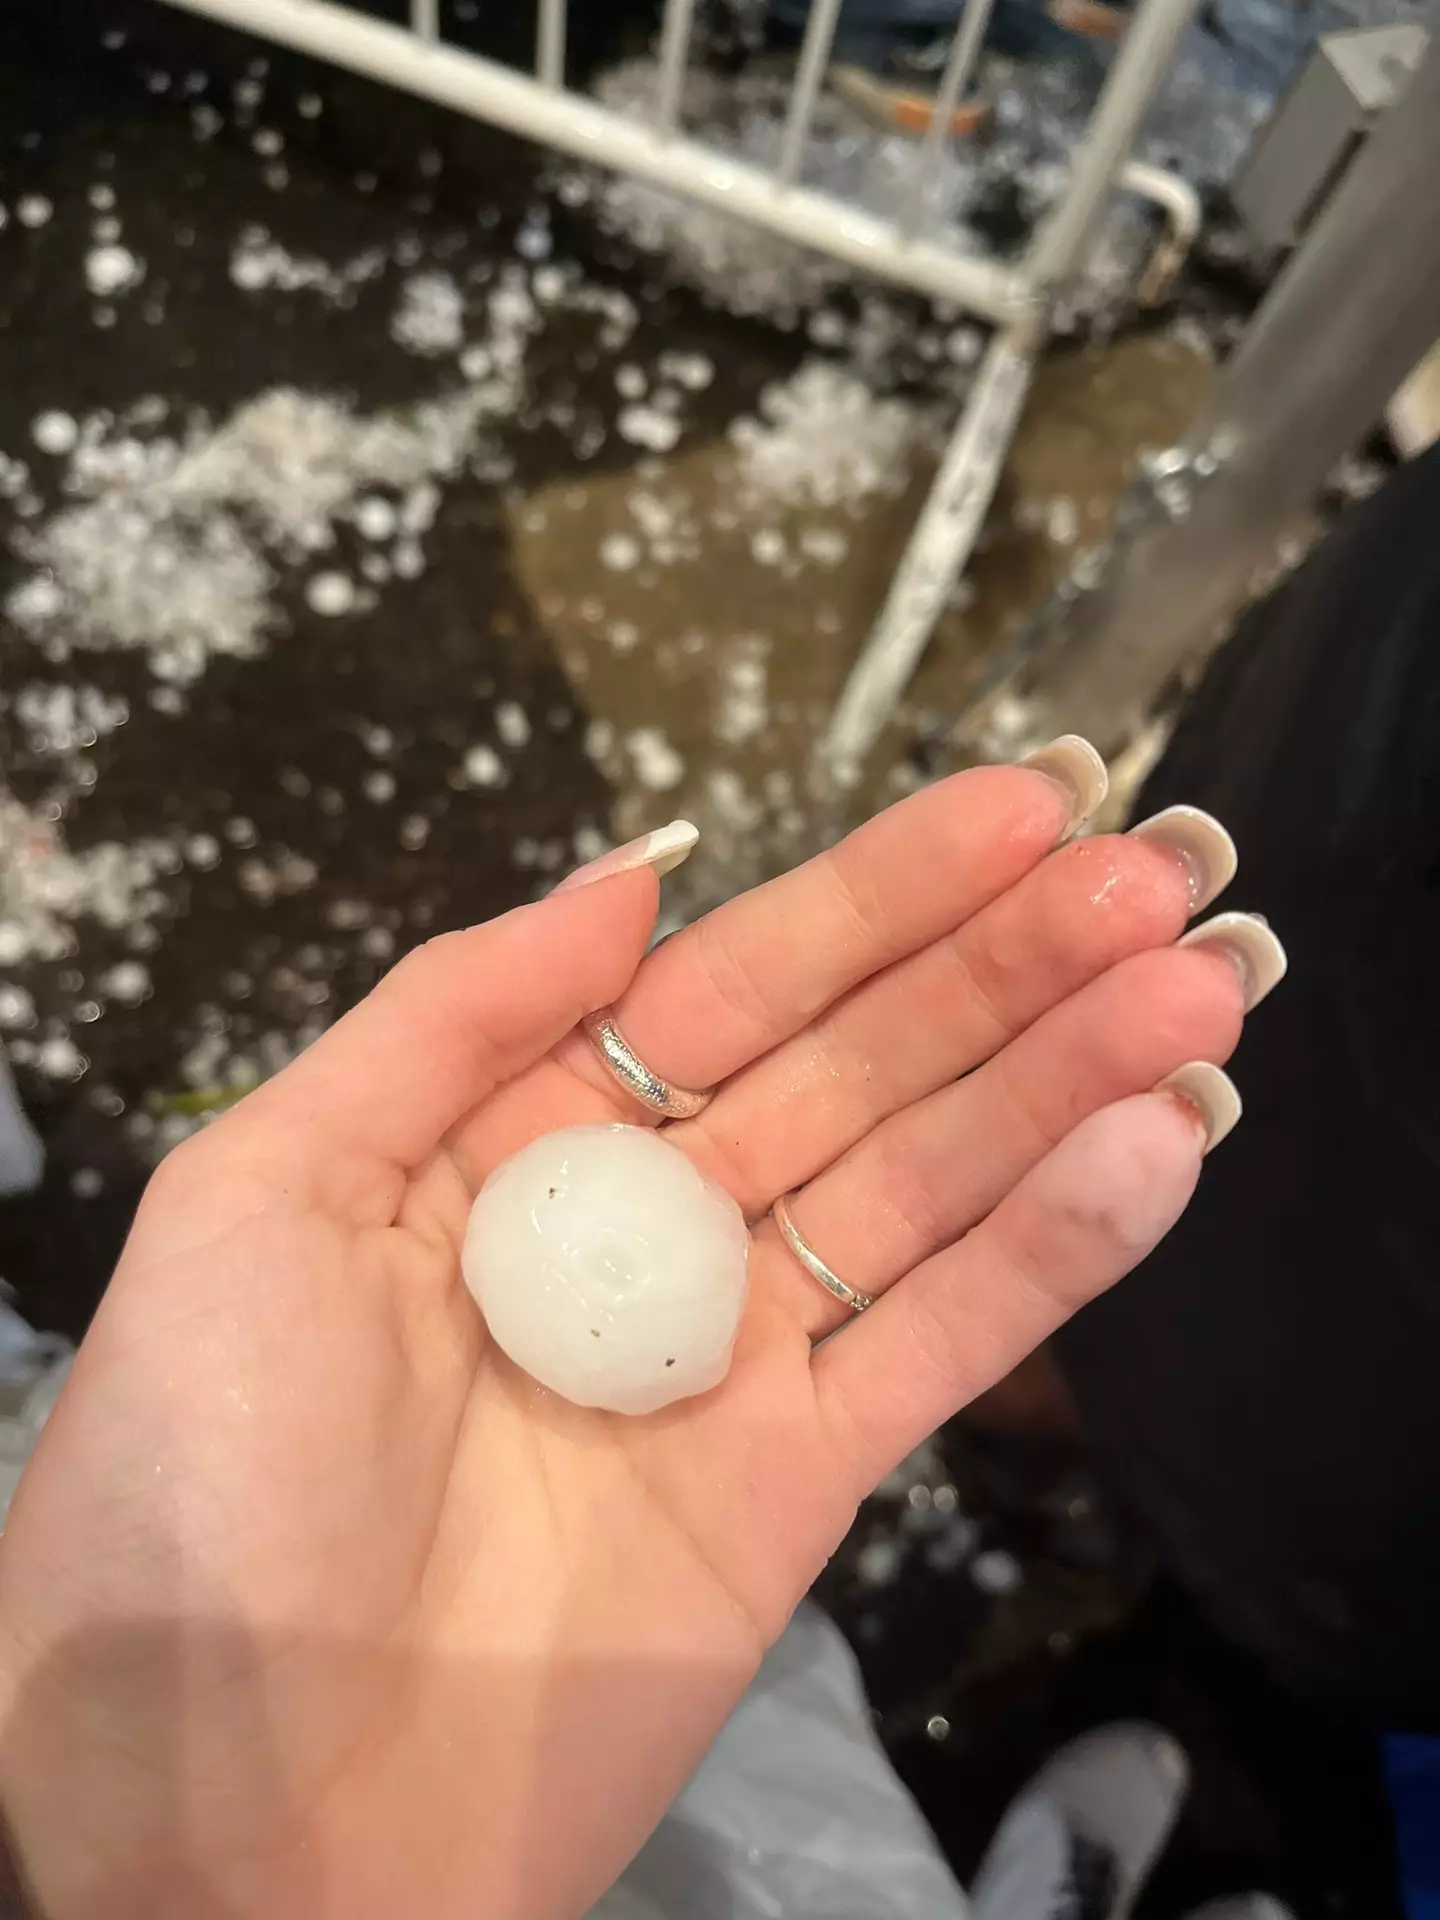 Louis Tomlinson fans were pelted with 'golf-ball sized' hail.